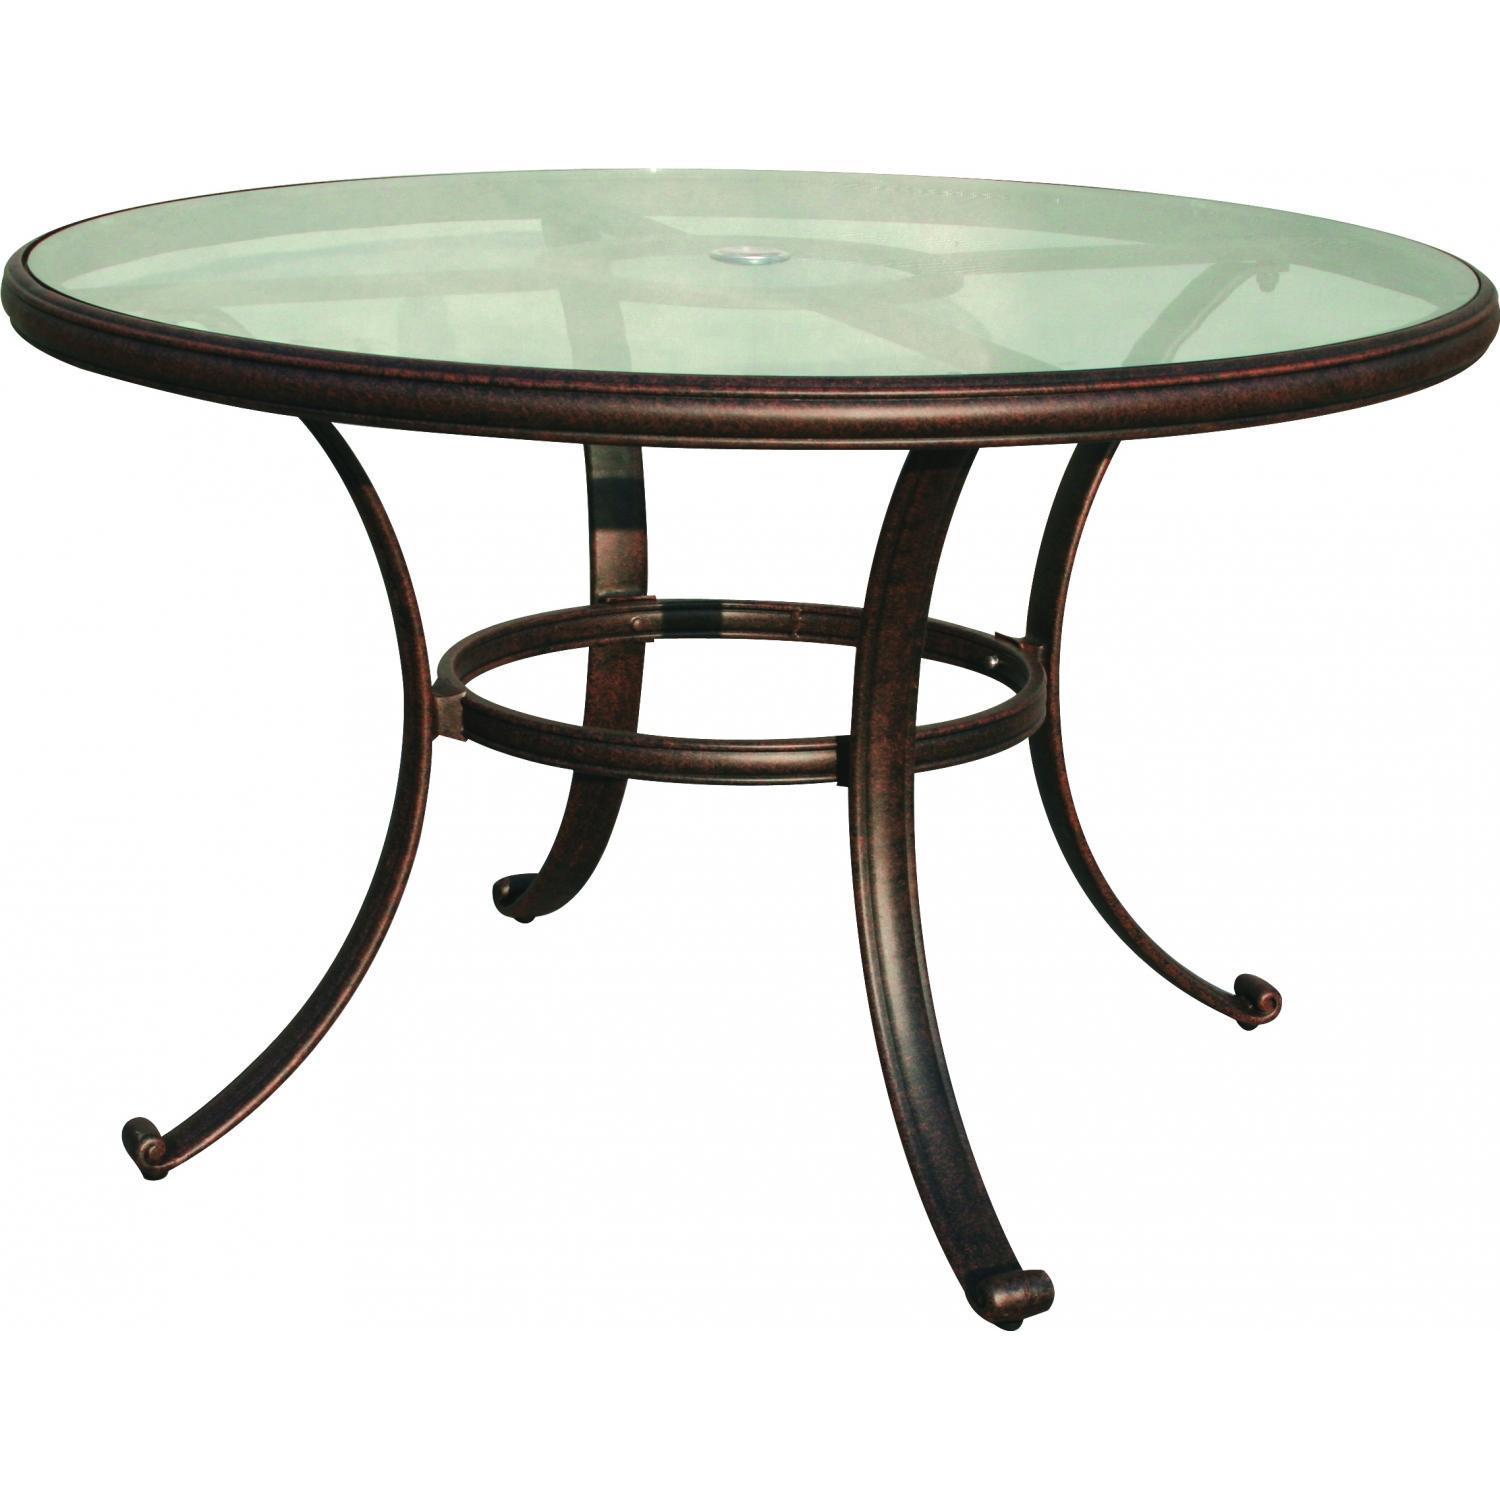 patio dining table glass photo - 4